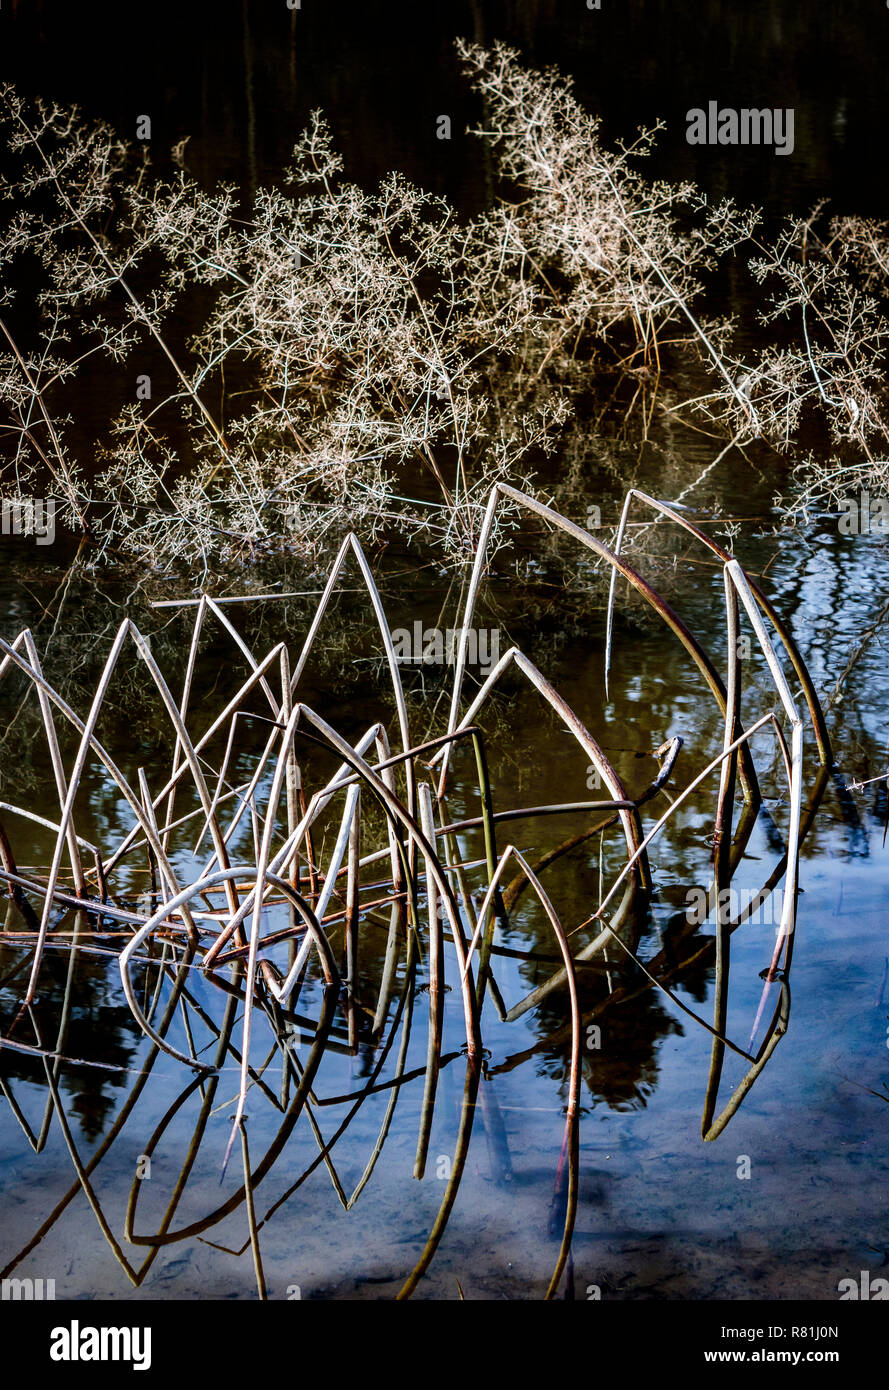 Abstract of bent, dead reeds and other plants in winter in a shallow, mud-bottomed pond which has a dark forest reflected on its surface. Stock Photo